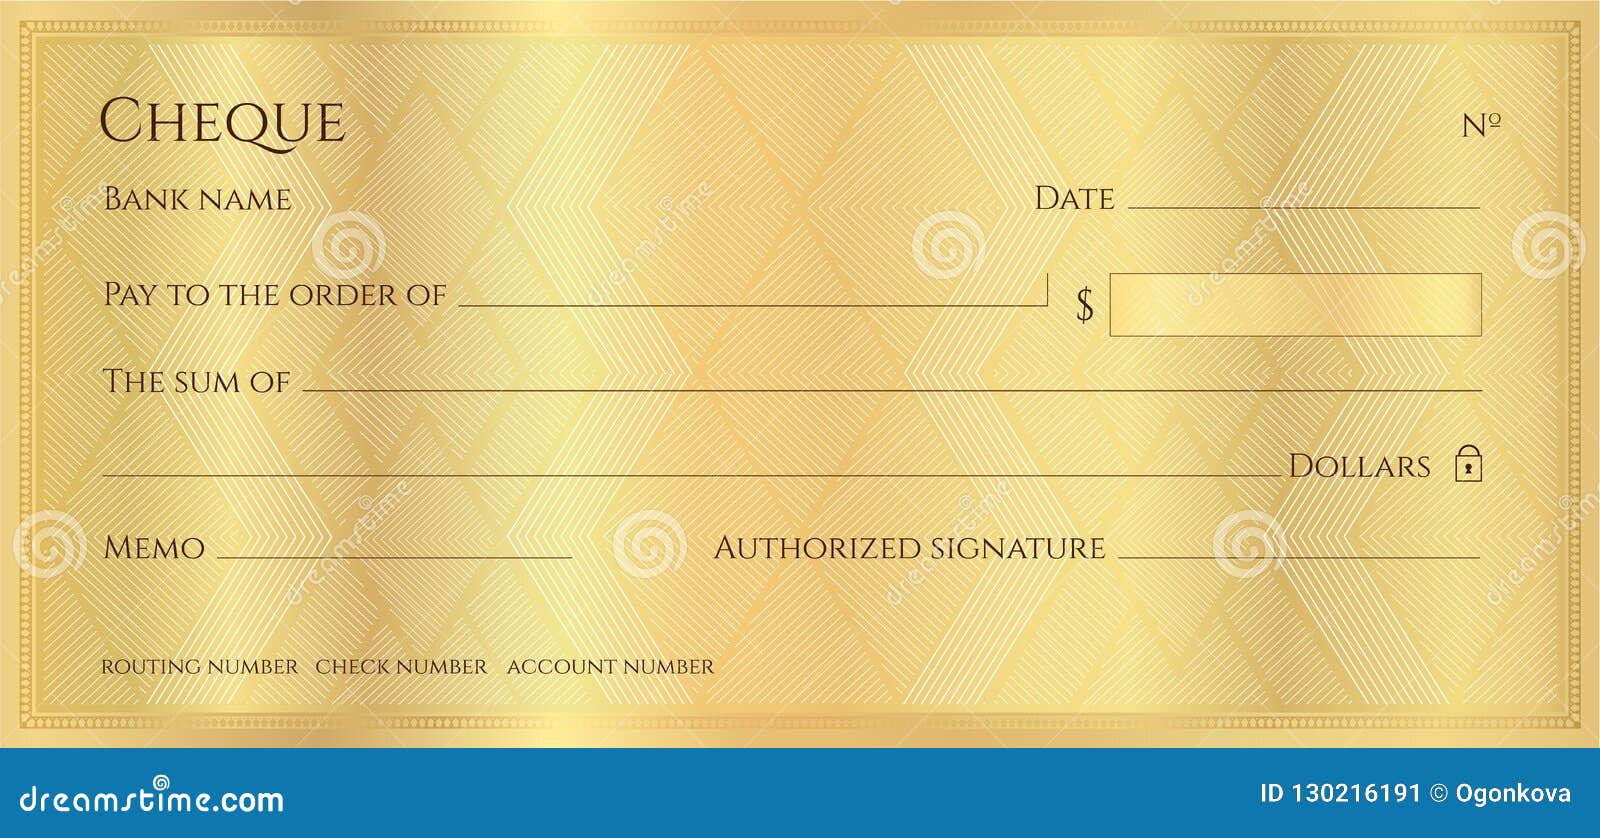 draw a specimen of blank cheque​ - Brainly.in